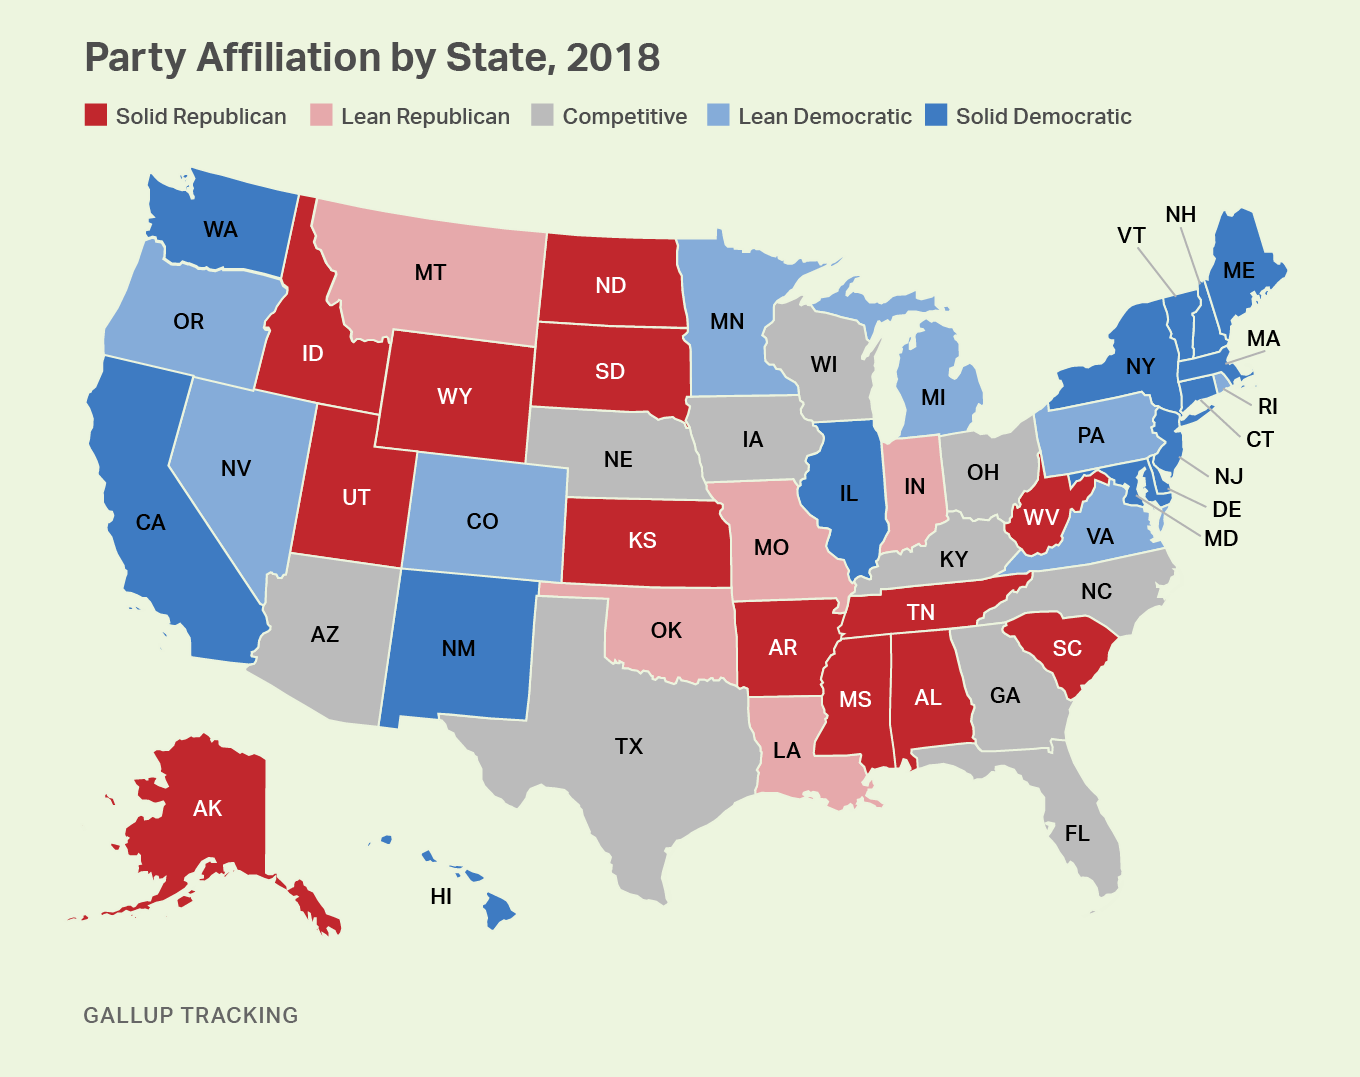 Partyaffiliationbystate.png